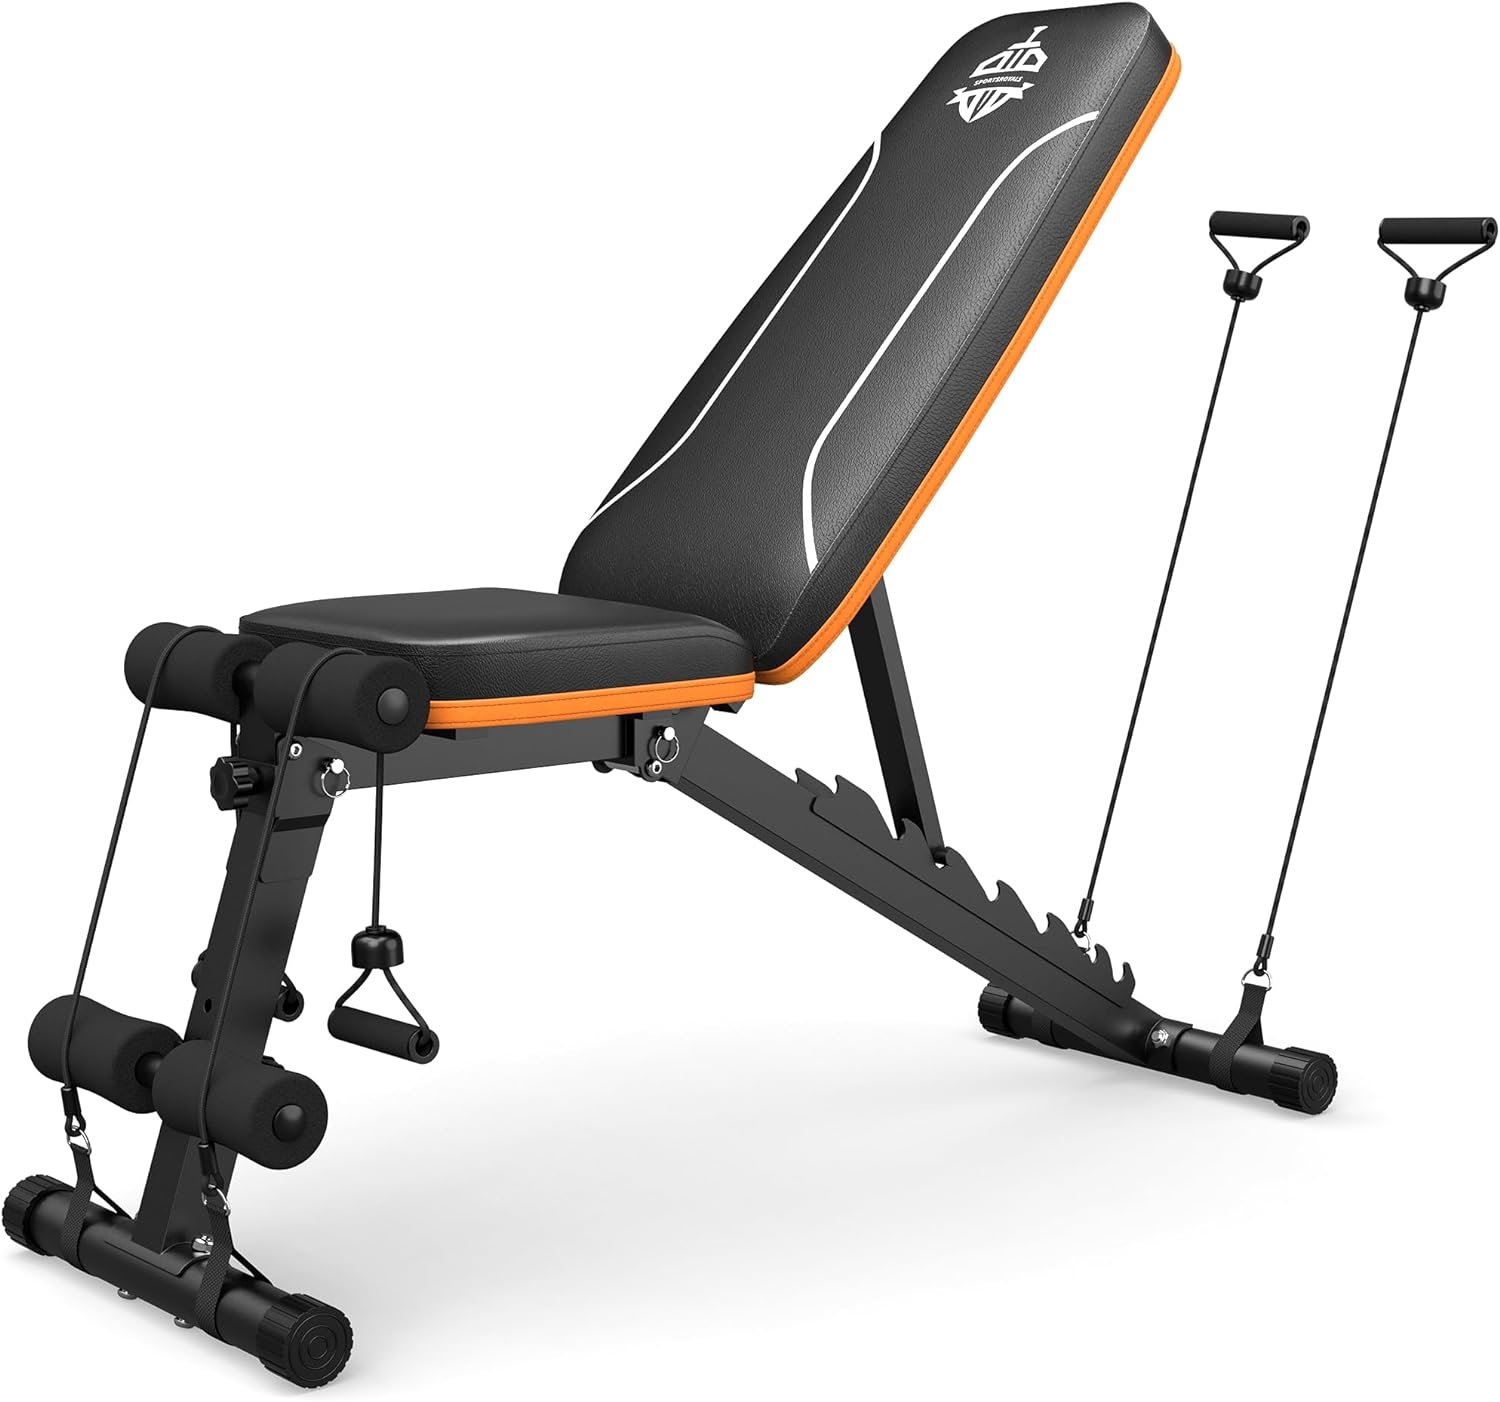 Sportsroyals Workout Bench Review